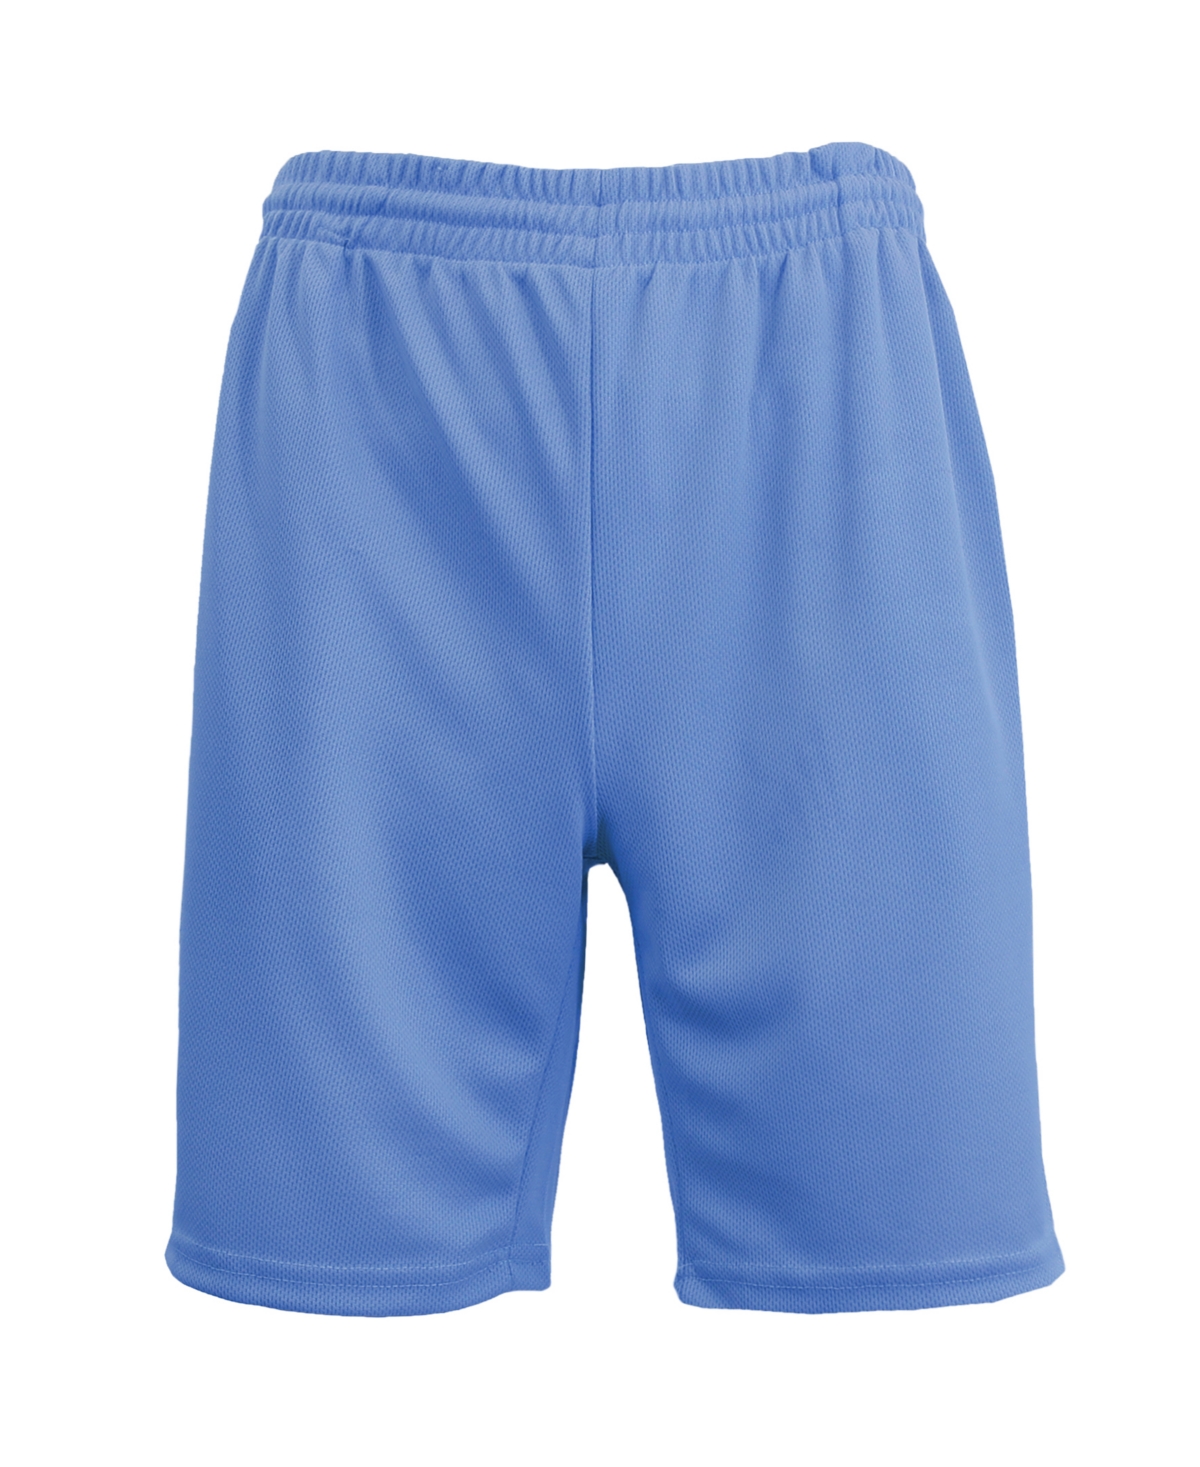 Galaxy By Harvic Men's Oversized Moisture Wicking Performance Basic Mesh Shorts In Light Blue